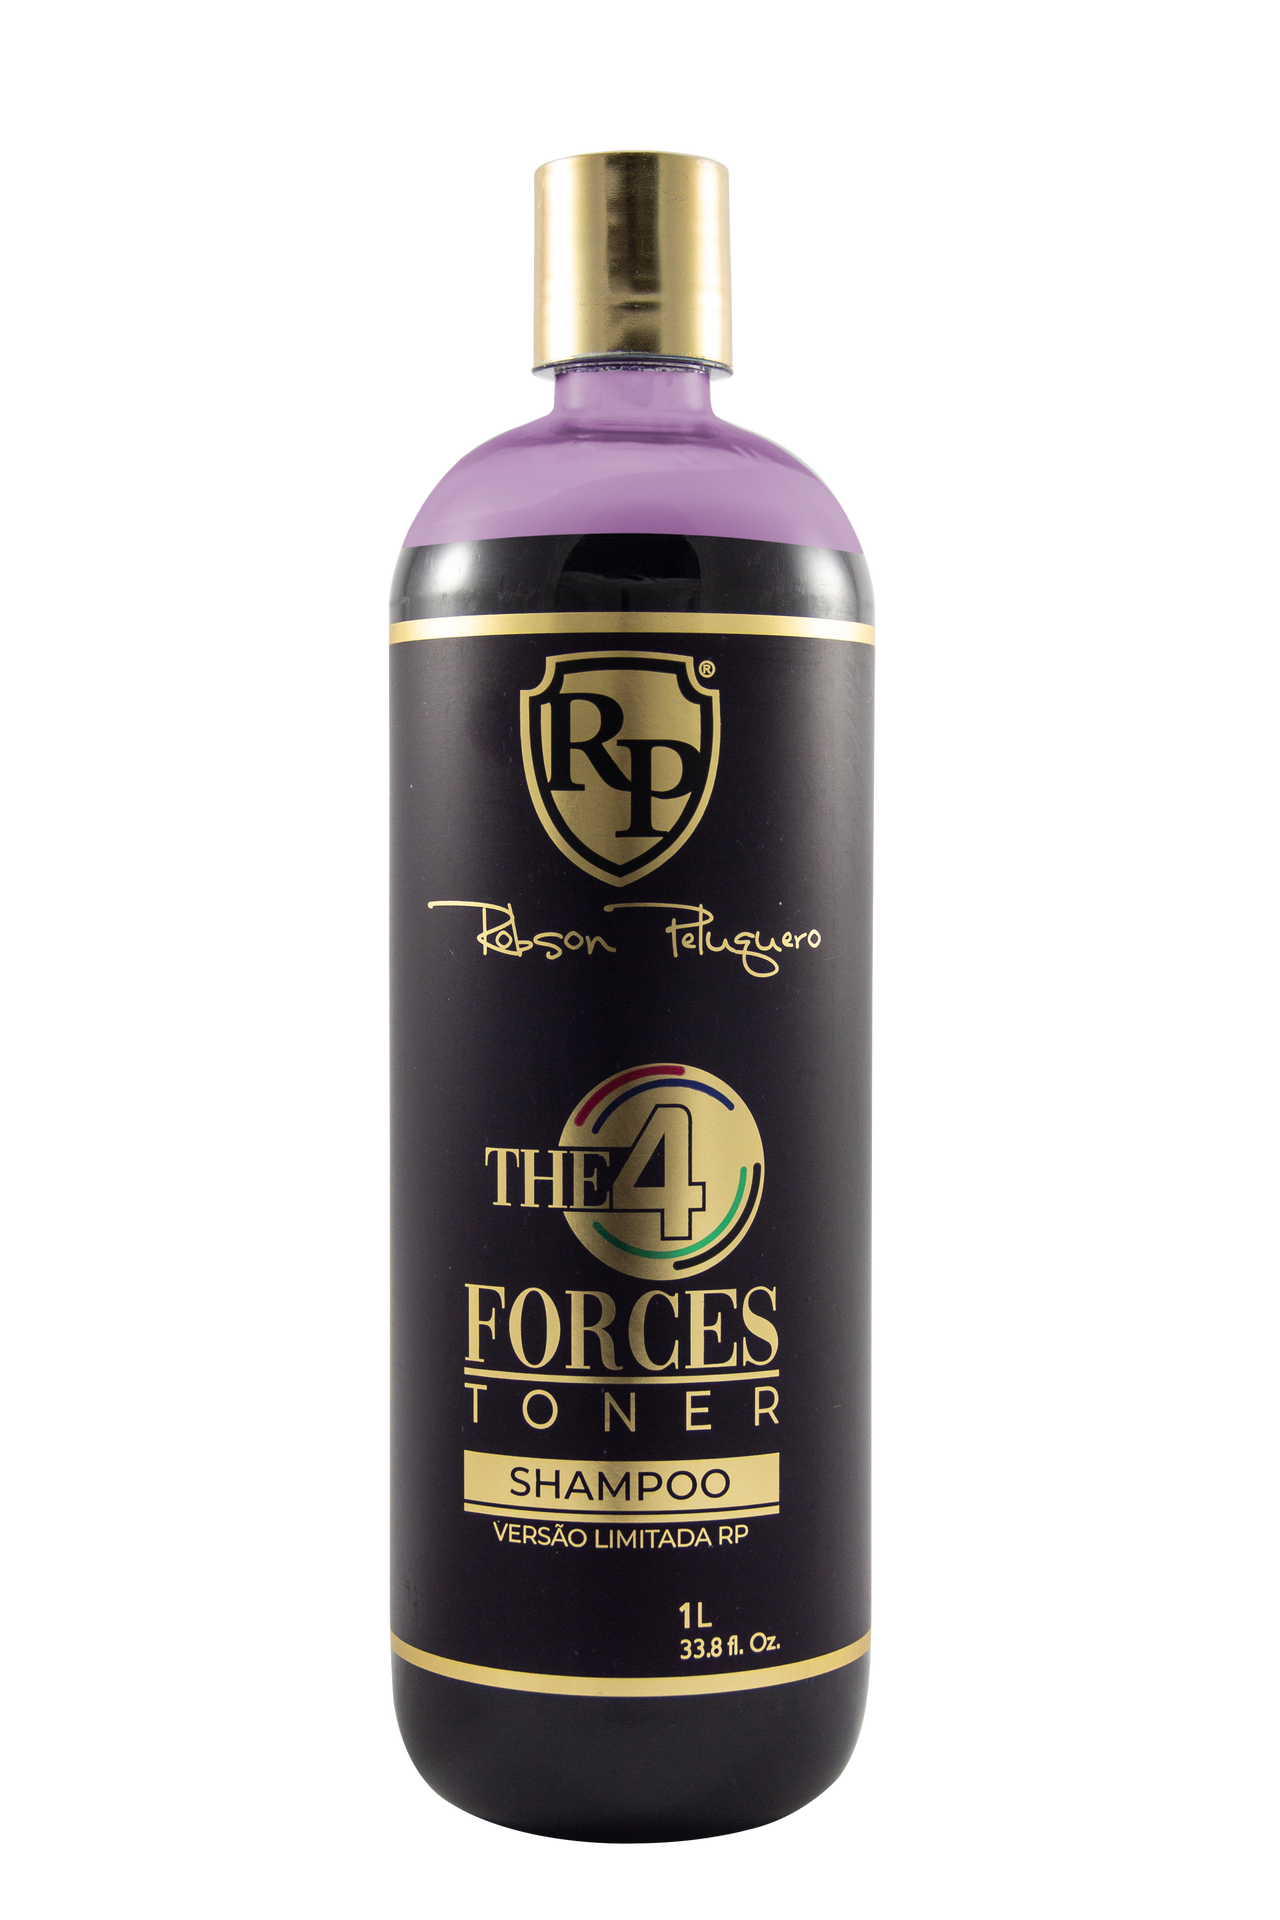 RP Toning Shampoo 4 Forces - 1L